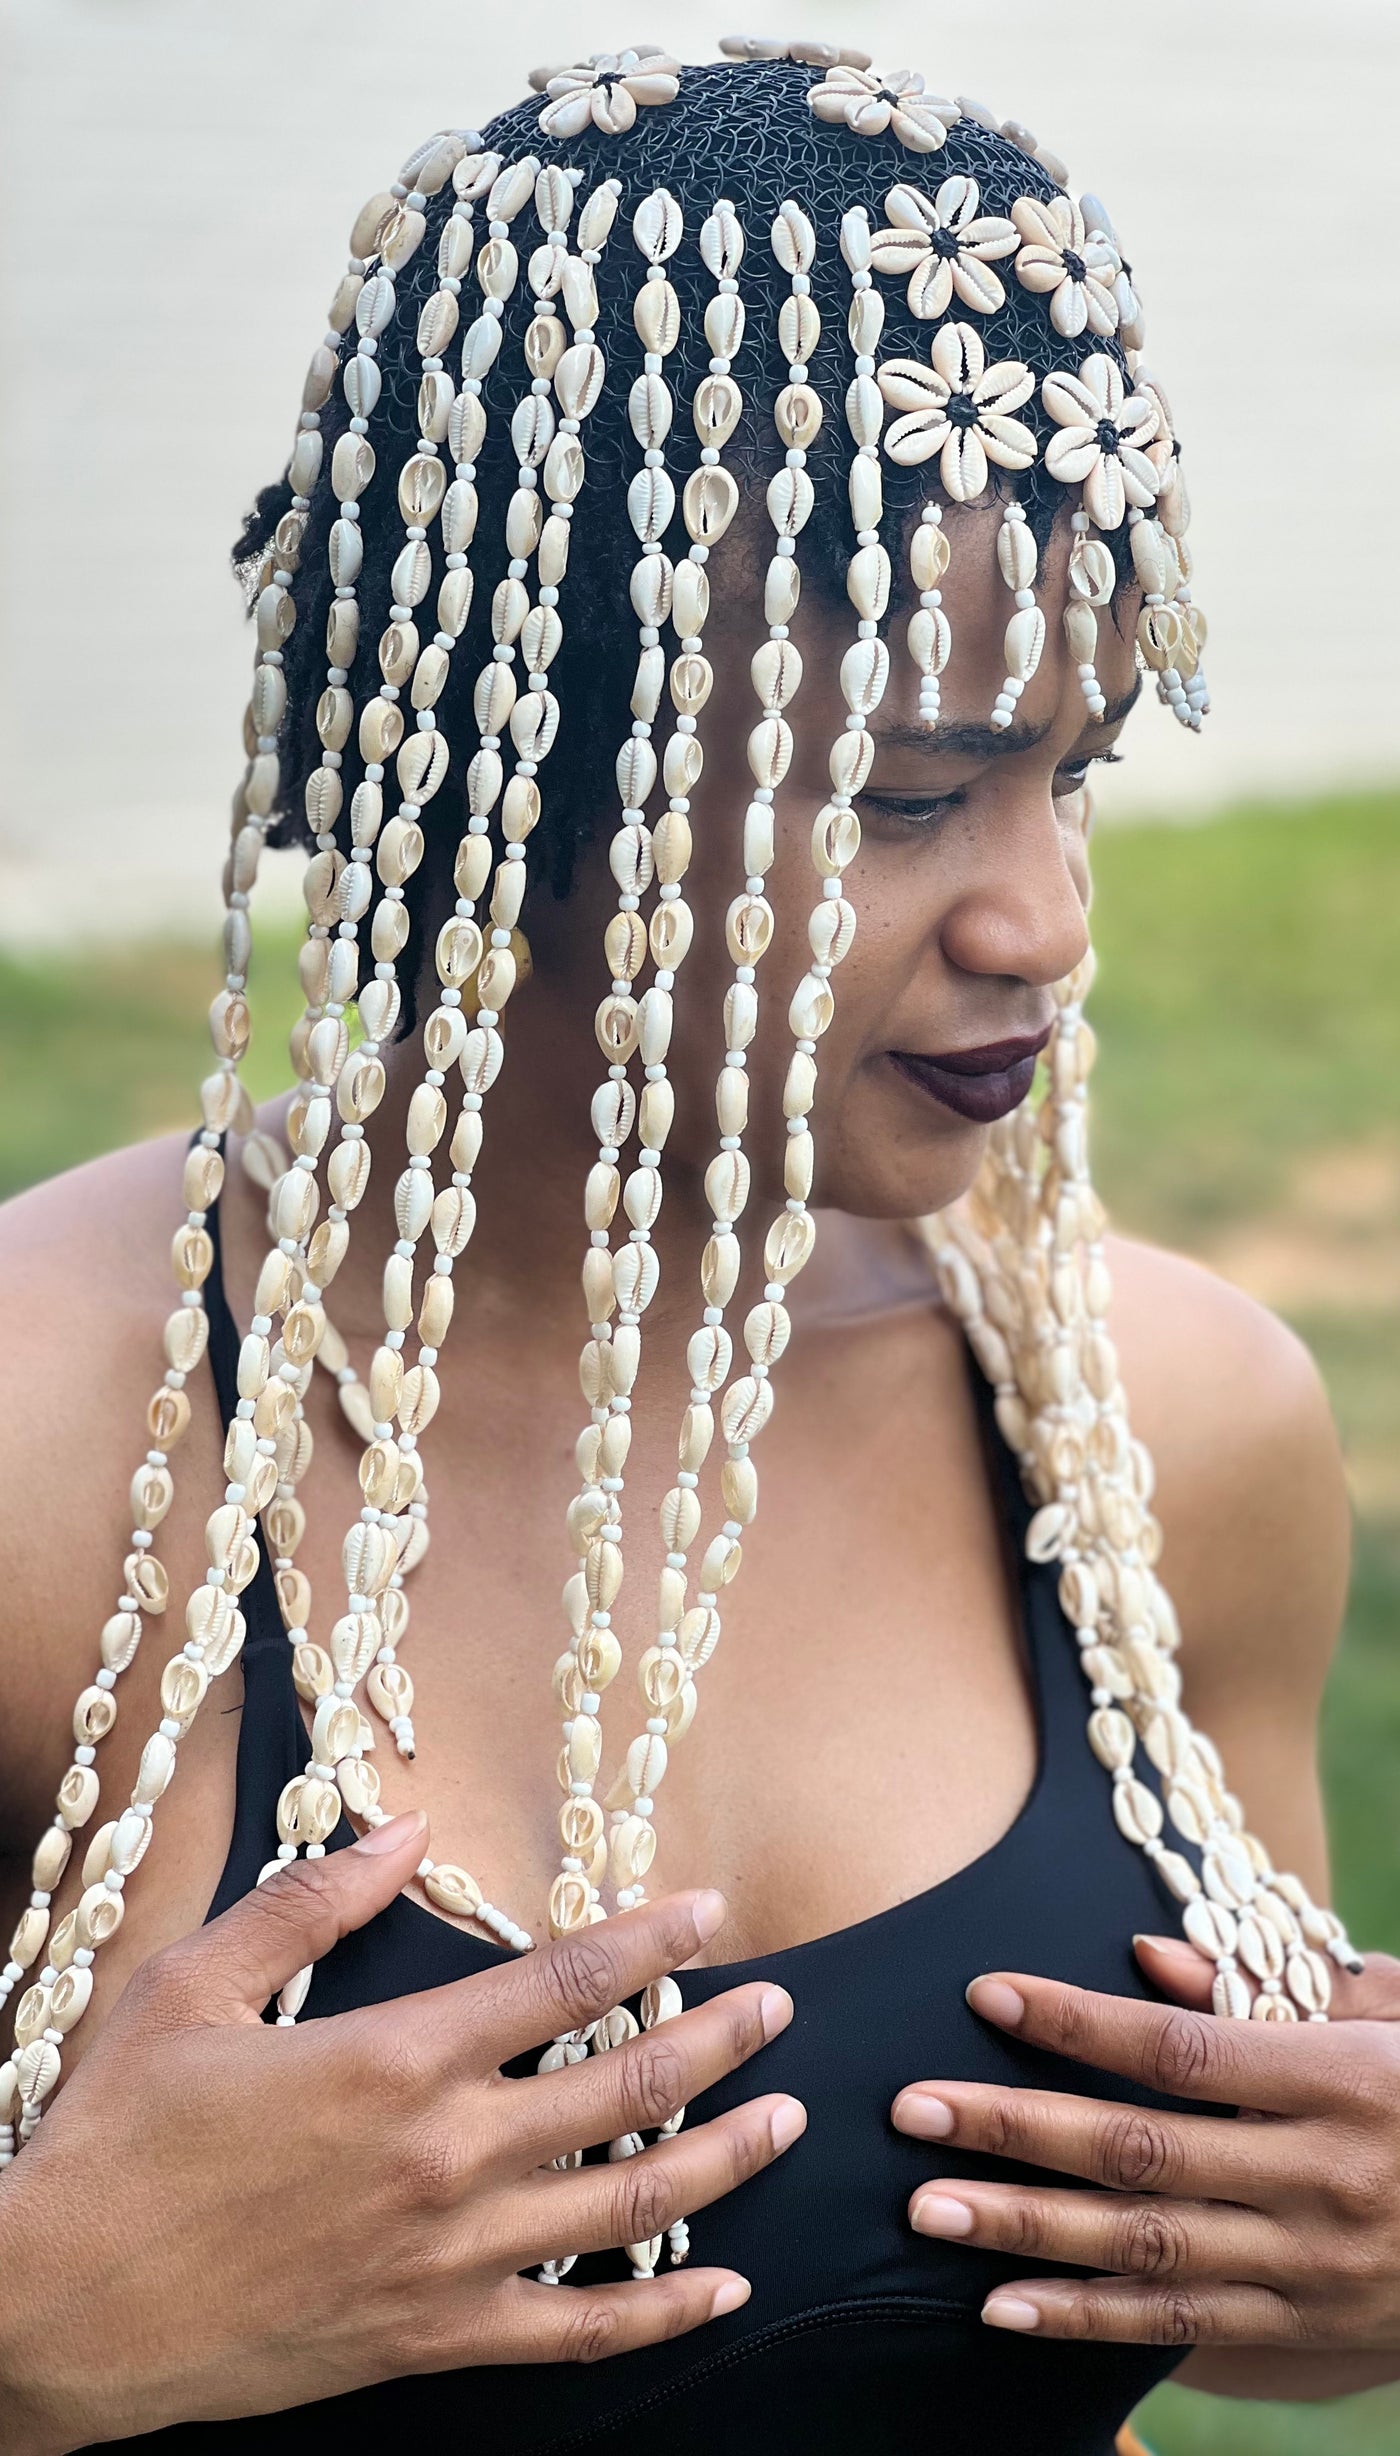 "Regal Reverie: Handmade Cleopatra-Inspired Cowrie Shells Head Piece - Embody African Royalty from Mali"